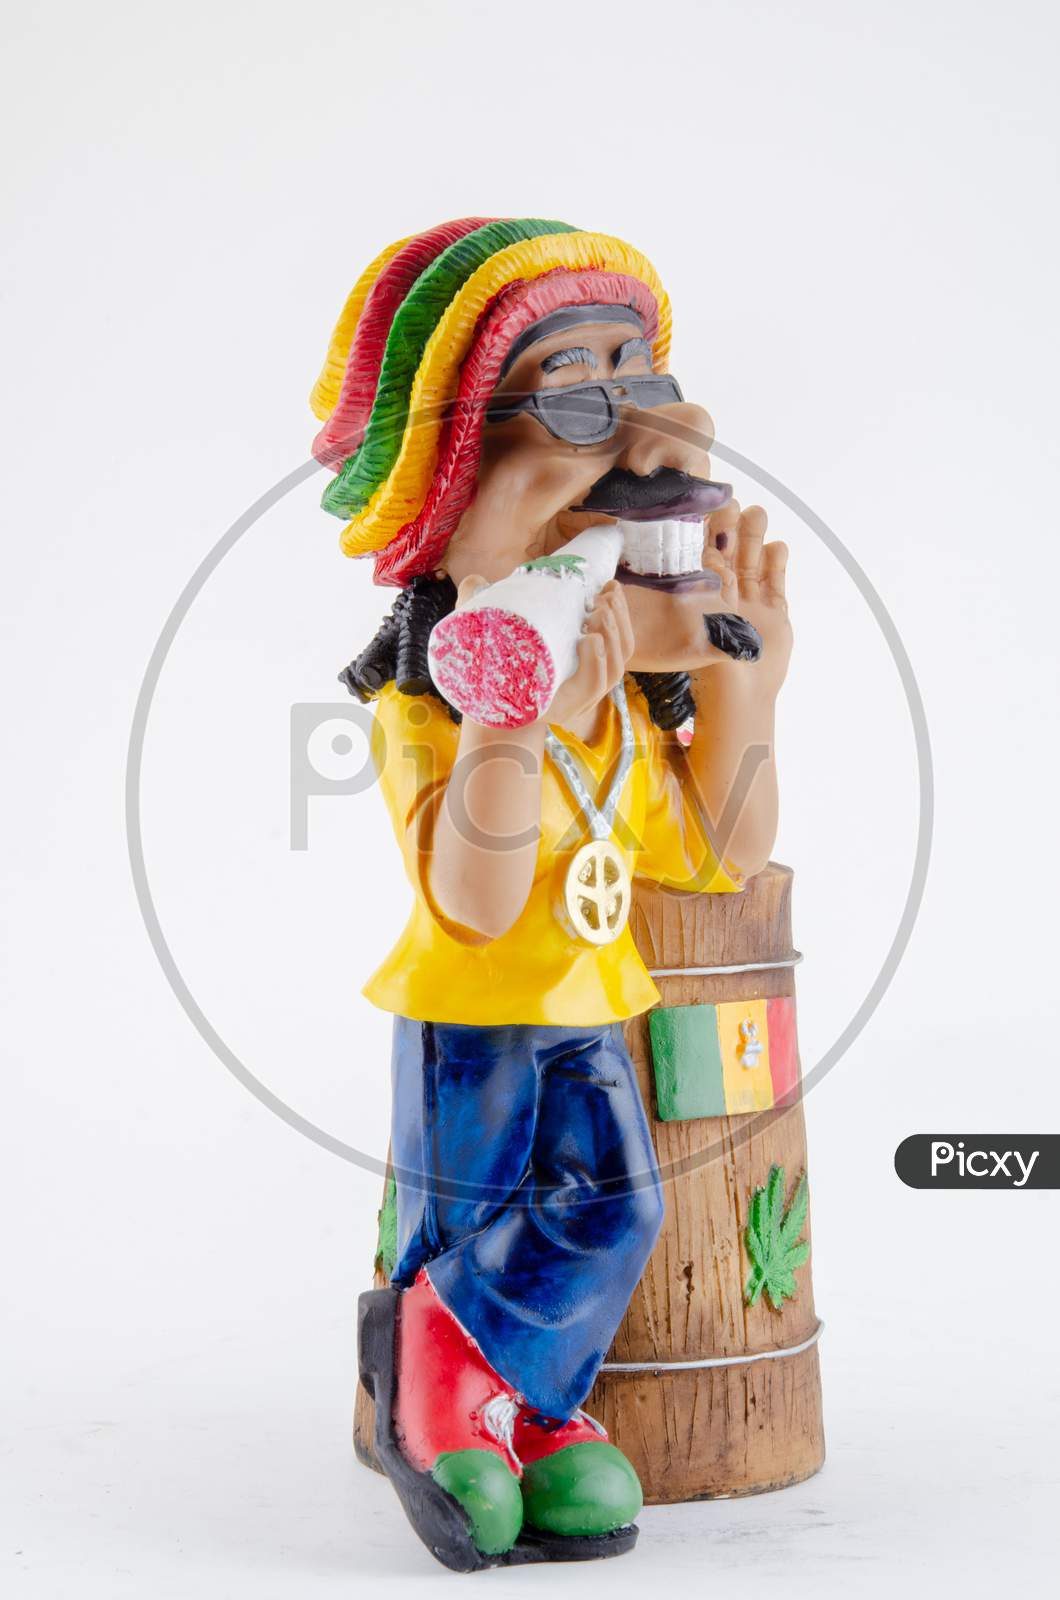 Action Figure or A Toy With  Things Holder Over an Isolated White Background